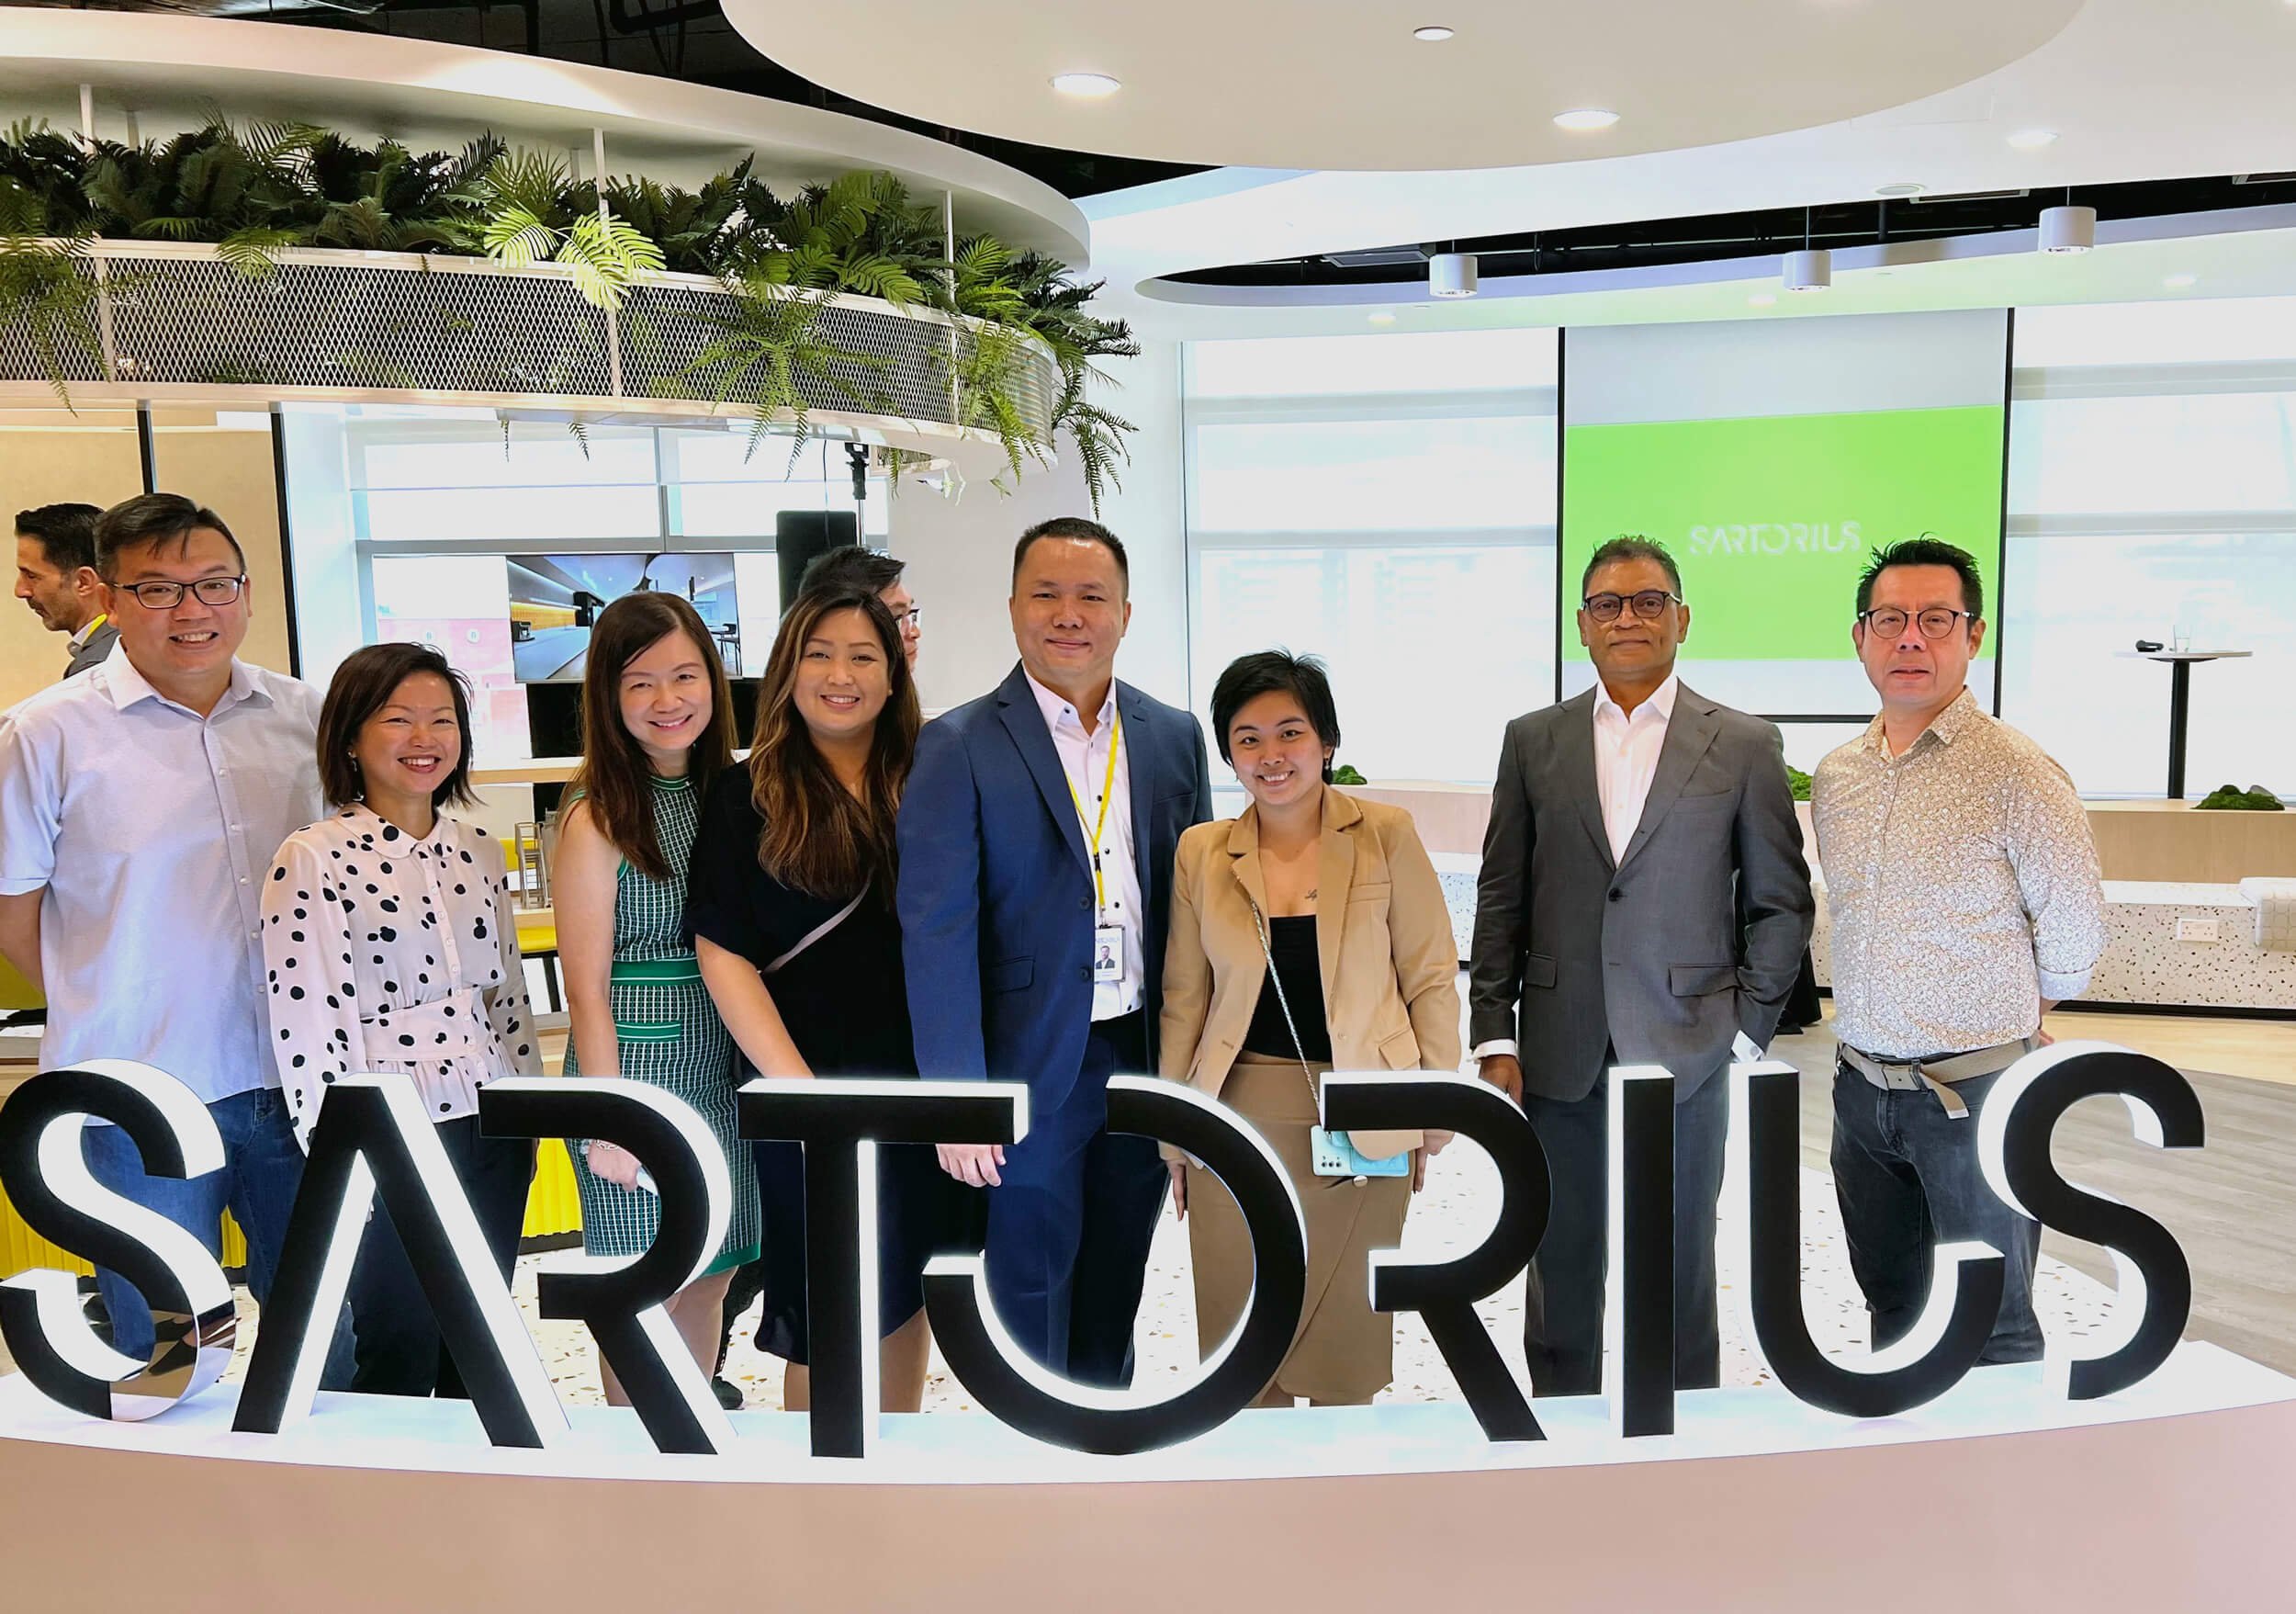  The Conexus team pose with Sartorius’s Manager of Service BPS, Southeast Asia Keng Hao Pang; Office Administrator Amanda Tan, and Managing Director Amit Sharma at the opening. 